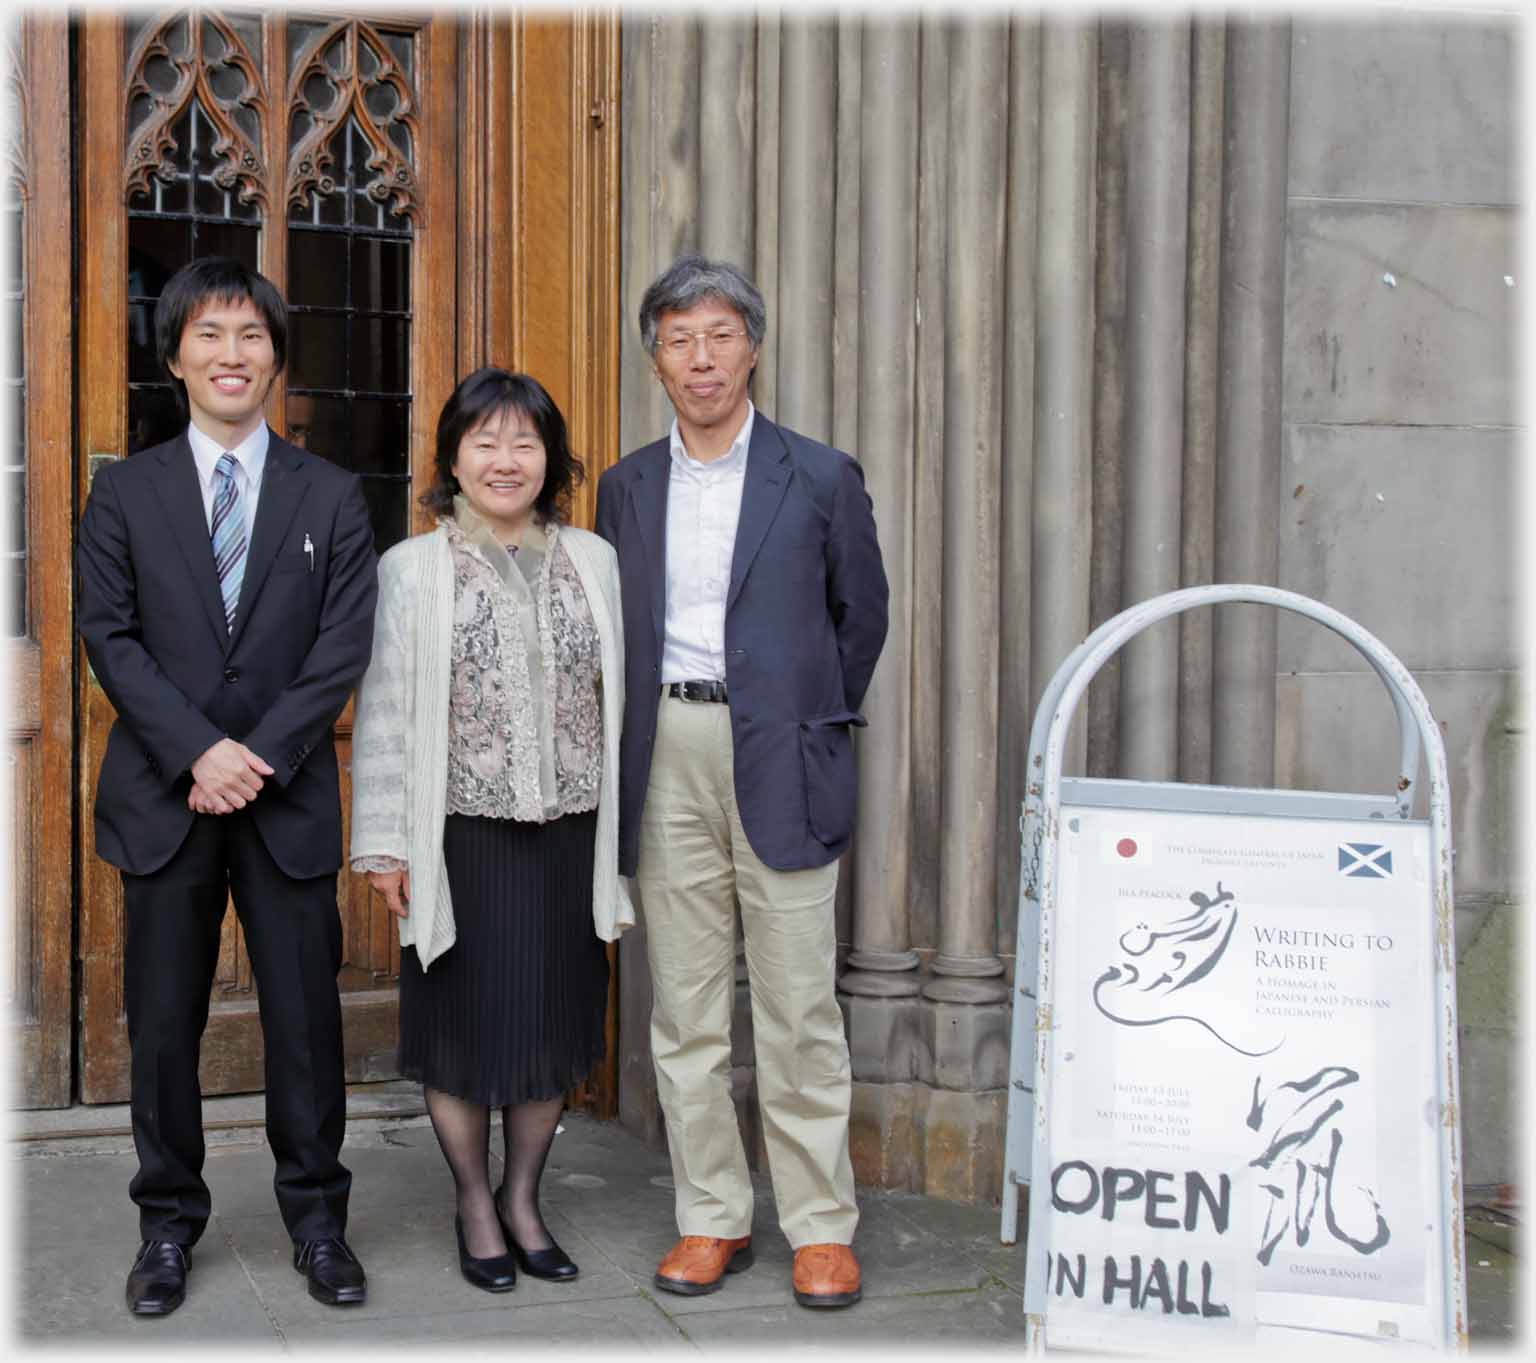 Japanese couple with younger man standing at church door by poster.